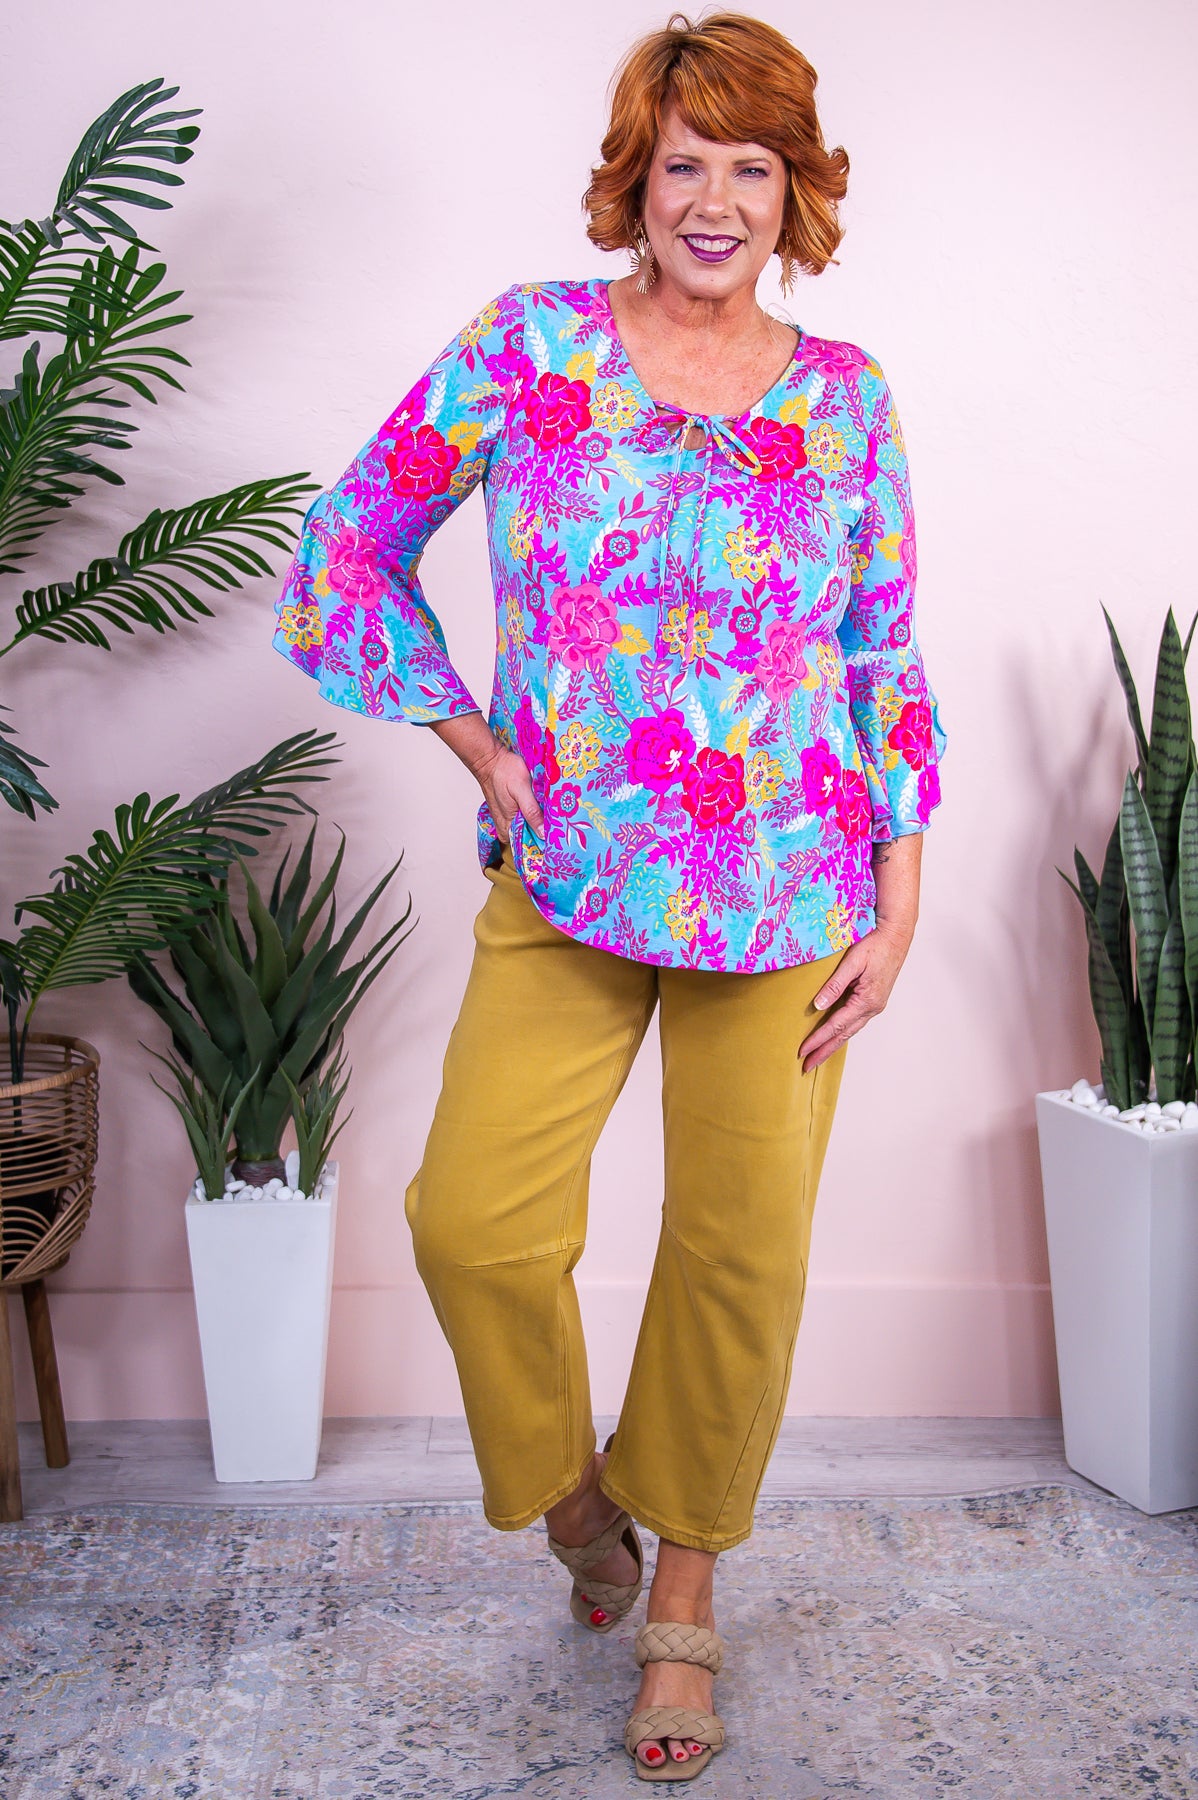 Life's Gifts Blue/Yellow/Magenta Floral Top - T9604BL